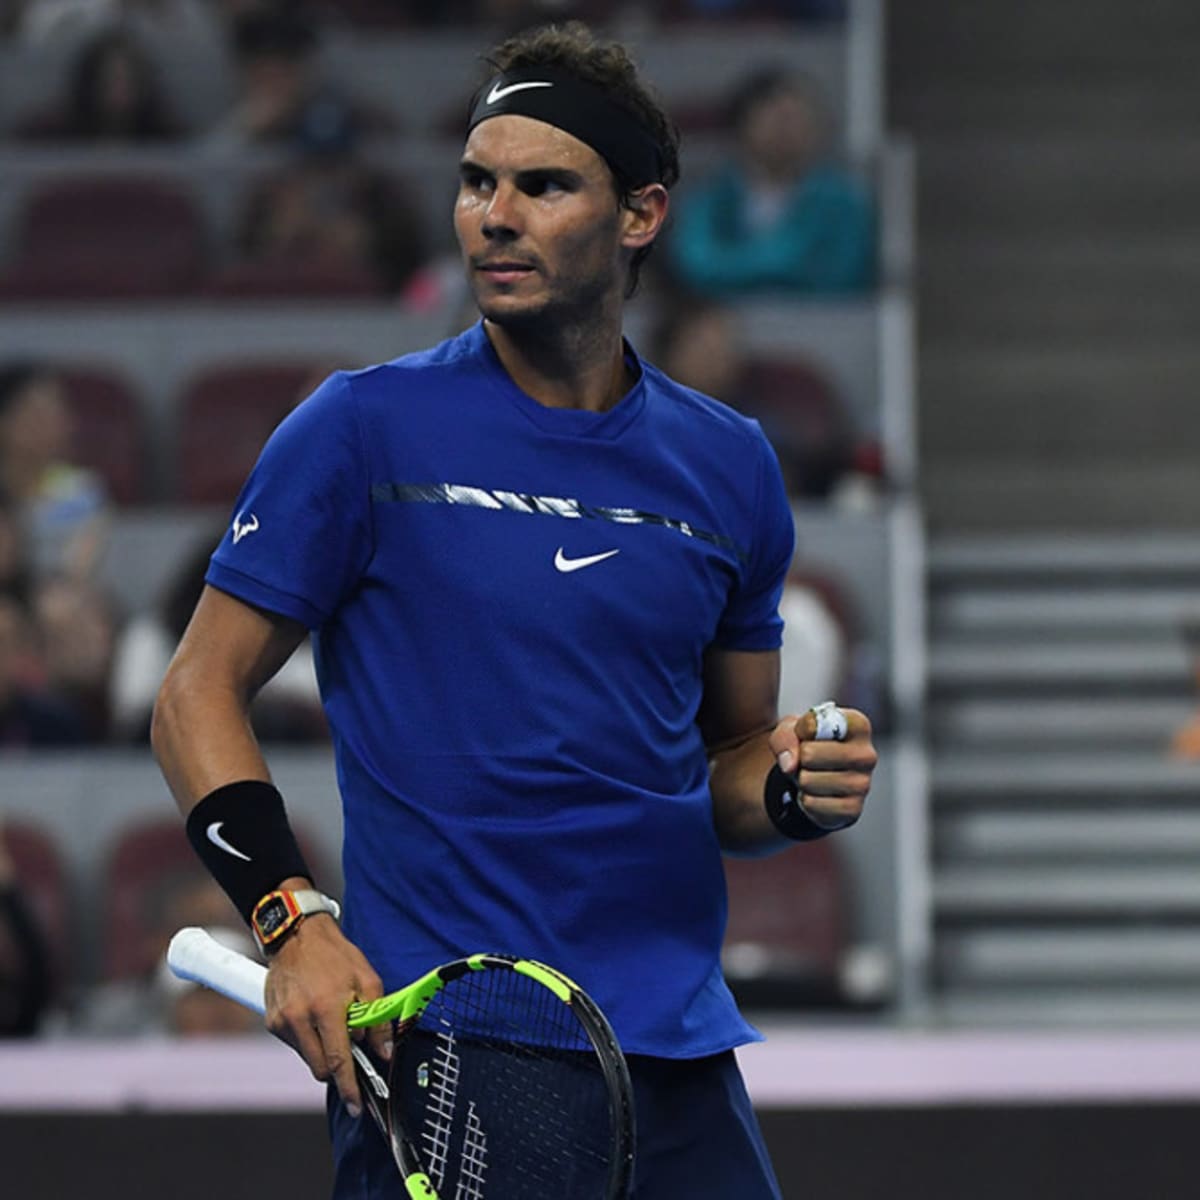 Nadal vs Kyrgios live stream Watch China Open online, TV, time